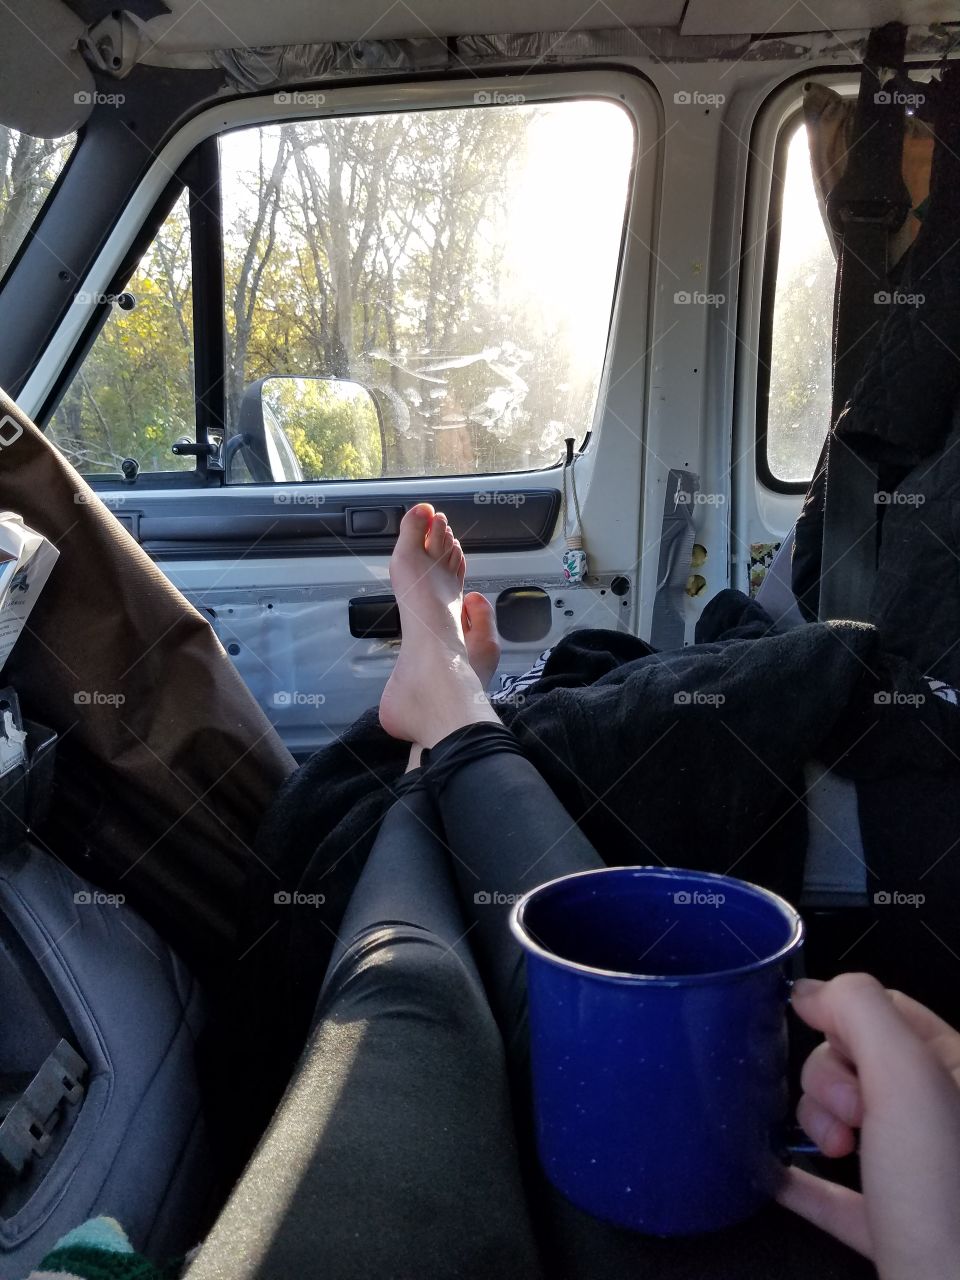 Enjoying a morning coffee in the front seats of a van.